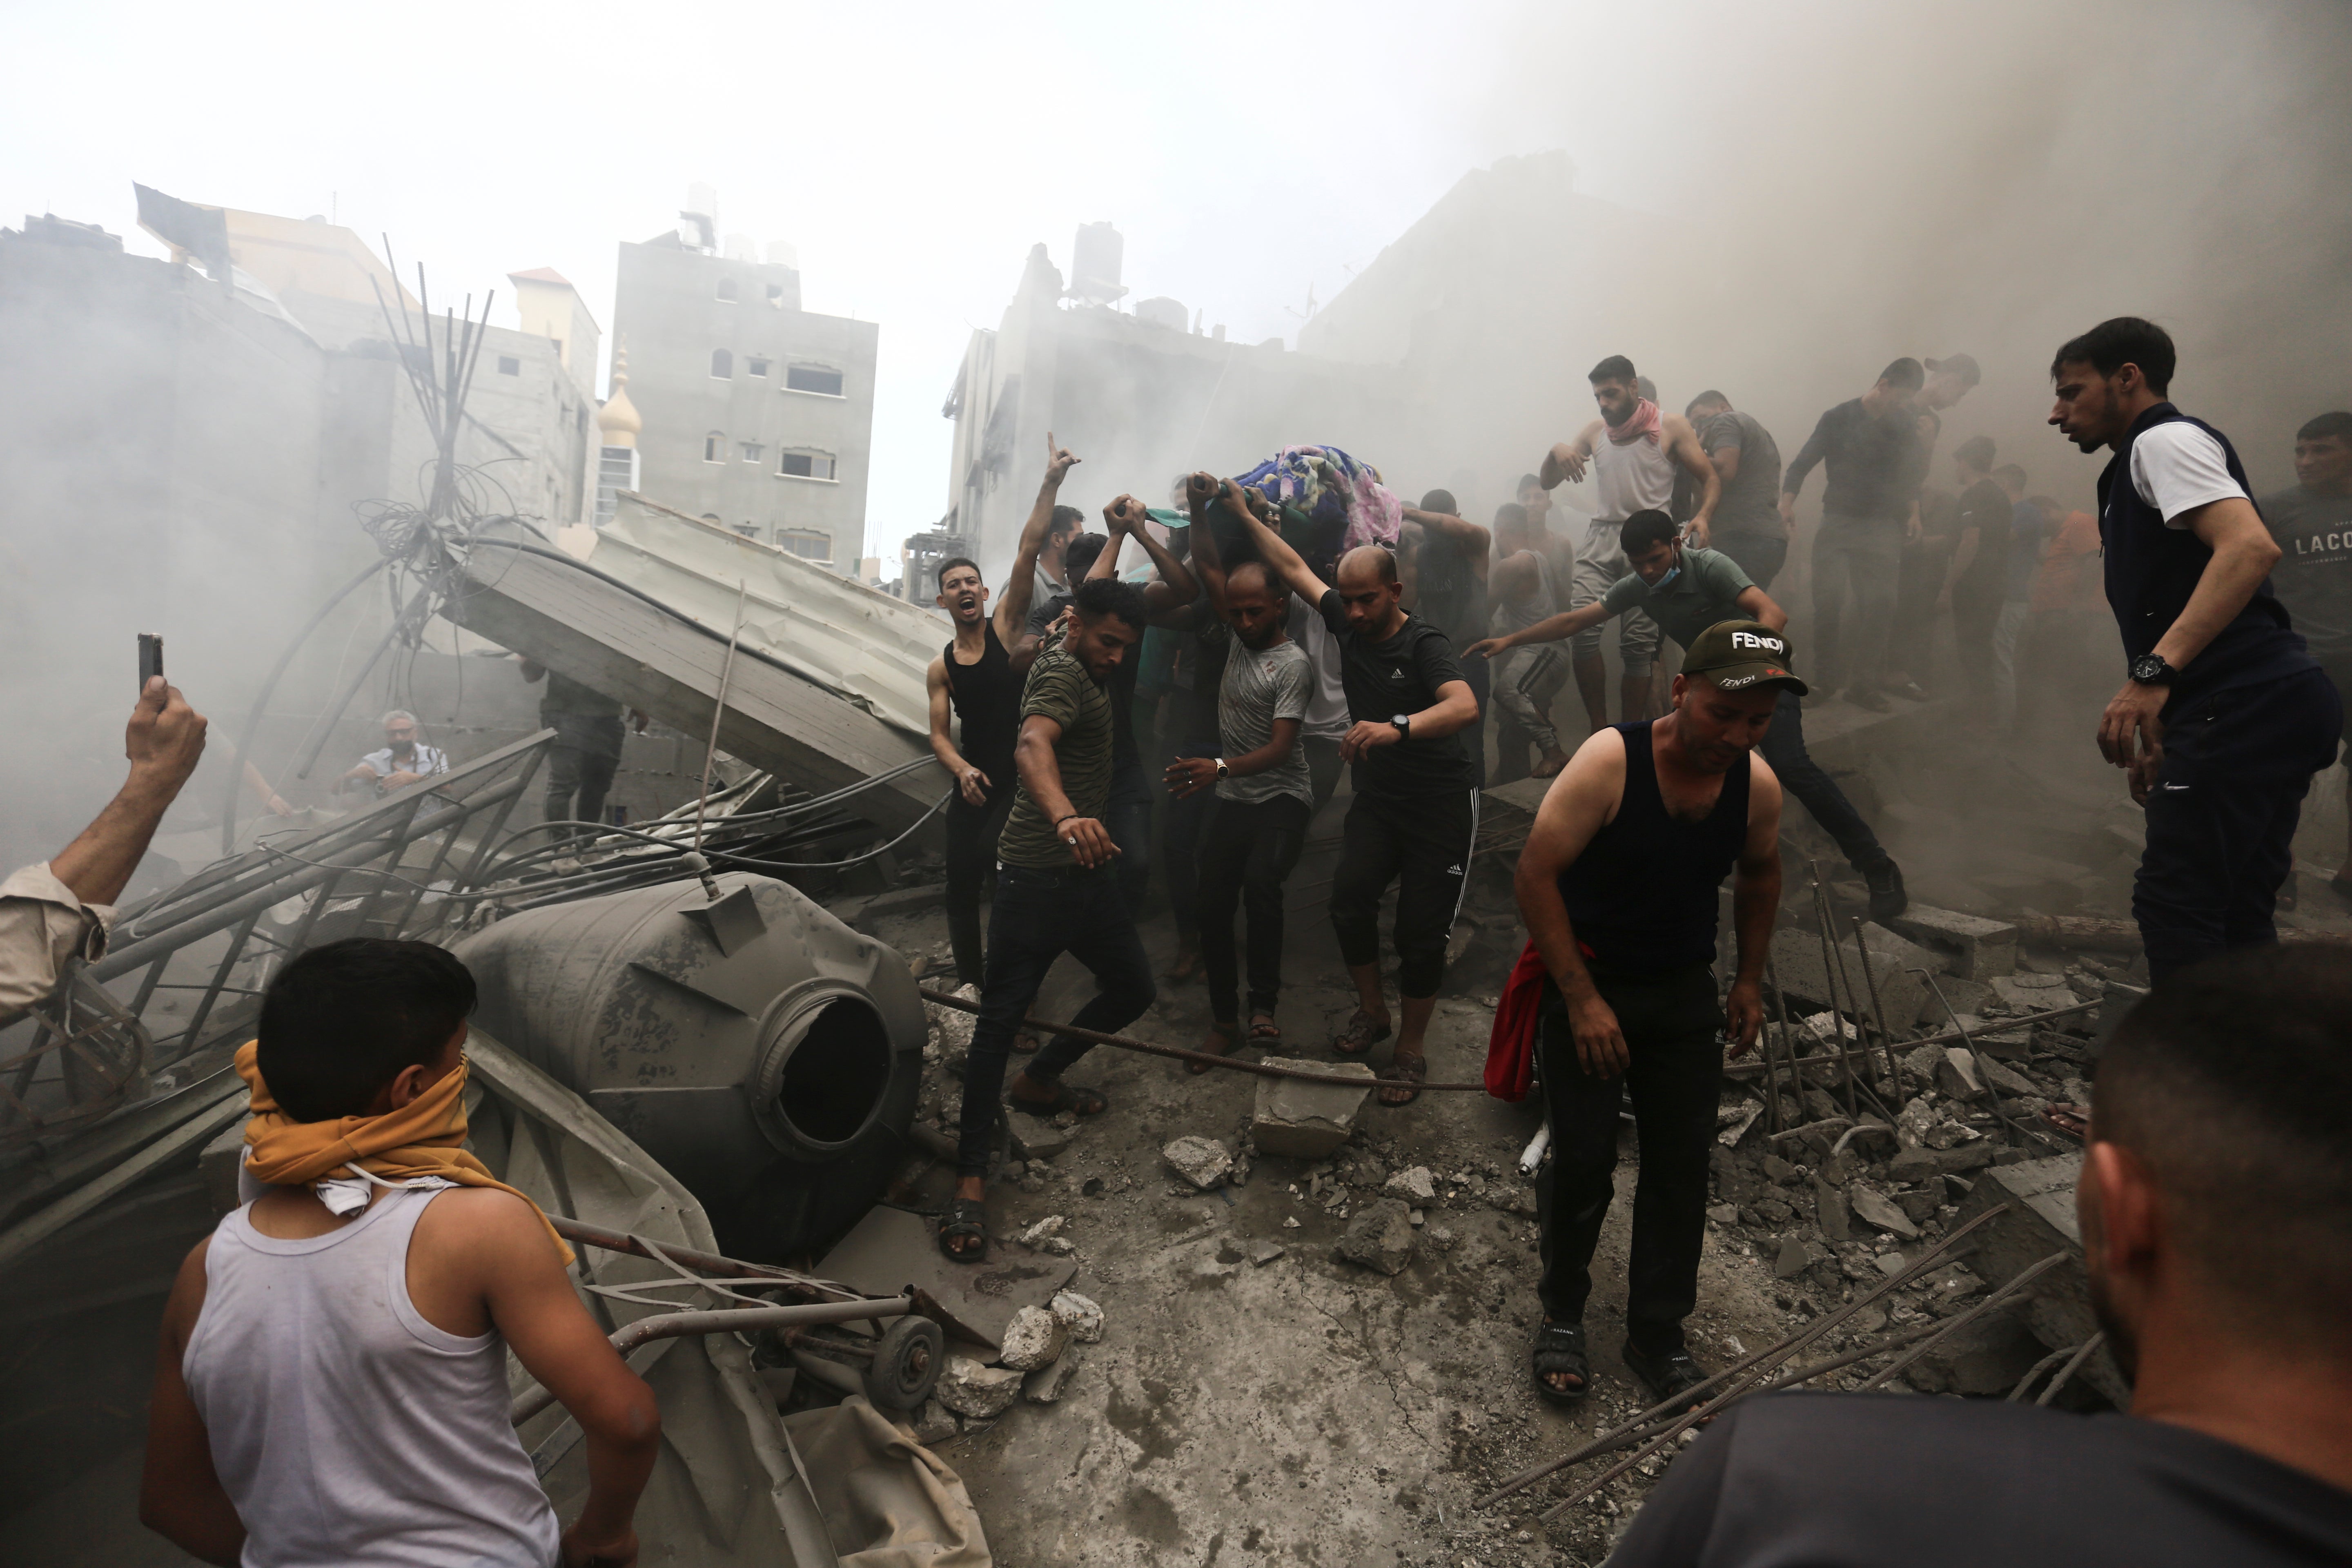 Palestinians remove a dead body from the rubble of a building after an Israeli airstrike Jebaliya refugee camp